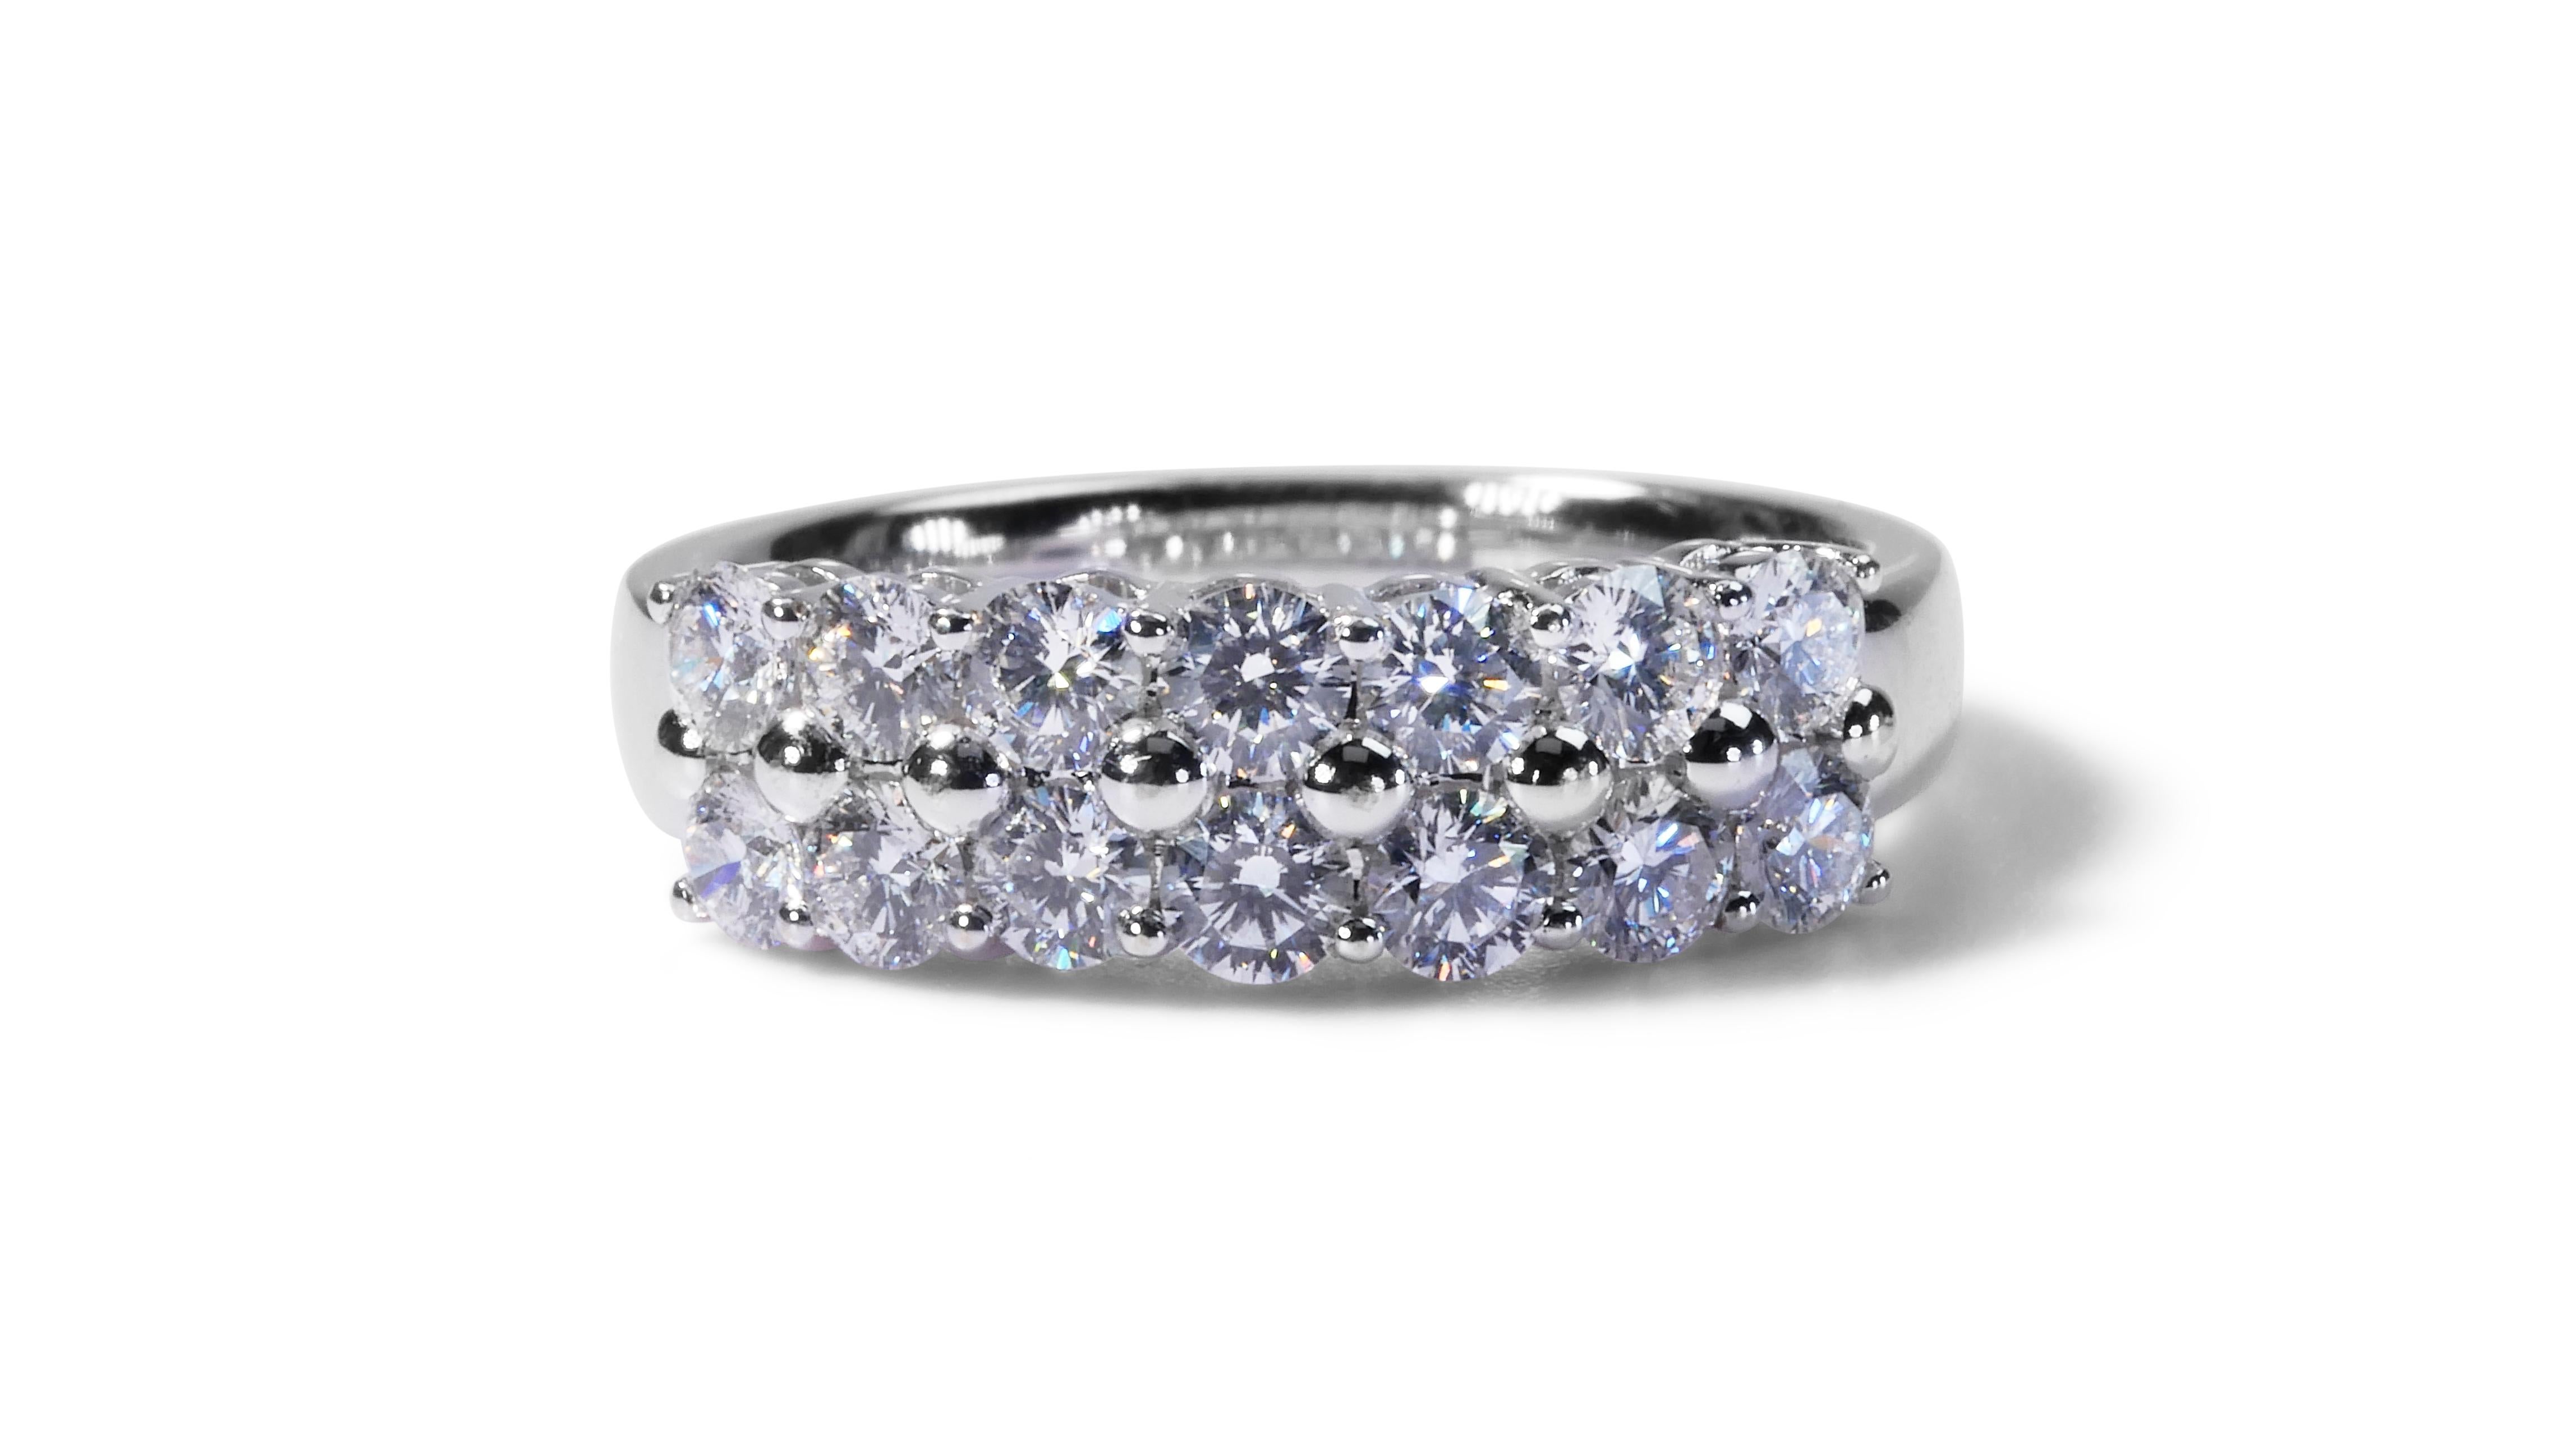 Women's Sparkling 18k White Gold Band Ring with 0.85 Ct Natural Diamonds-IGI Certificate